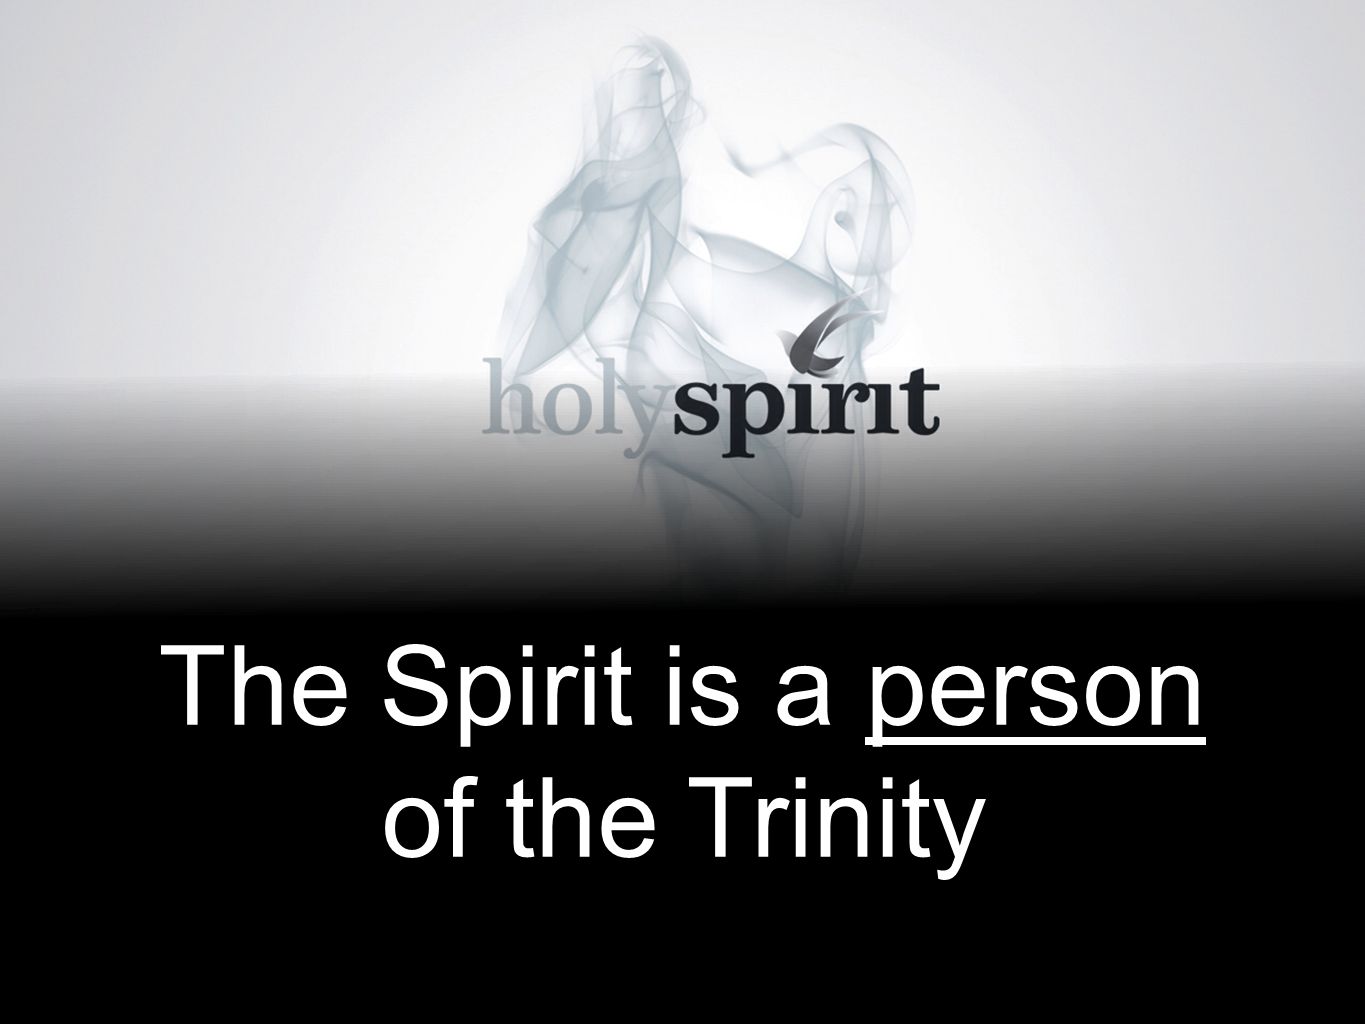 The Spirit is a person of the Trinity